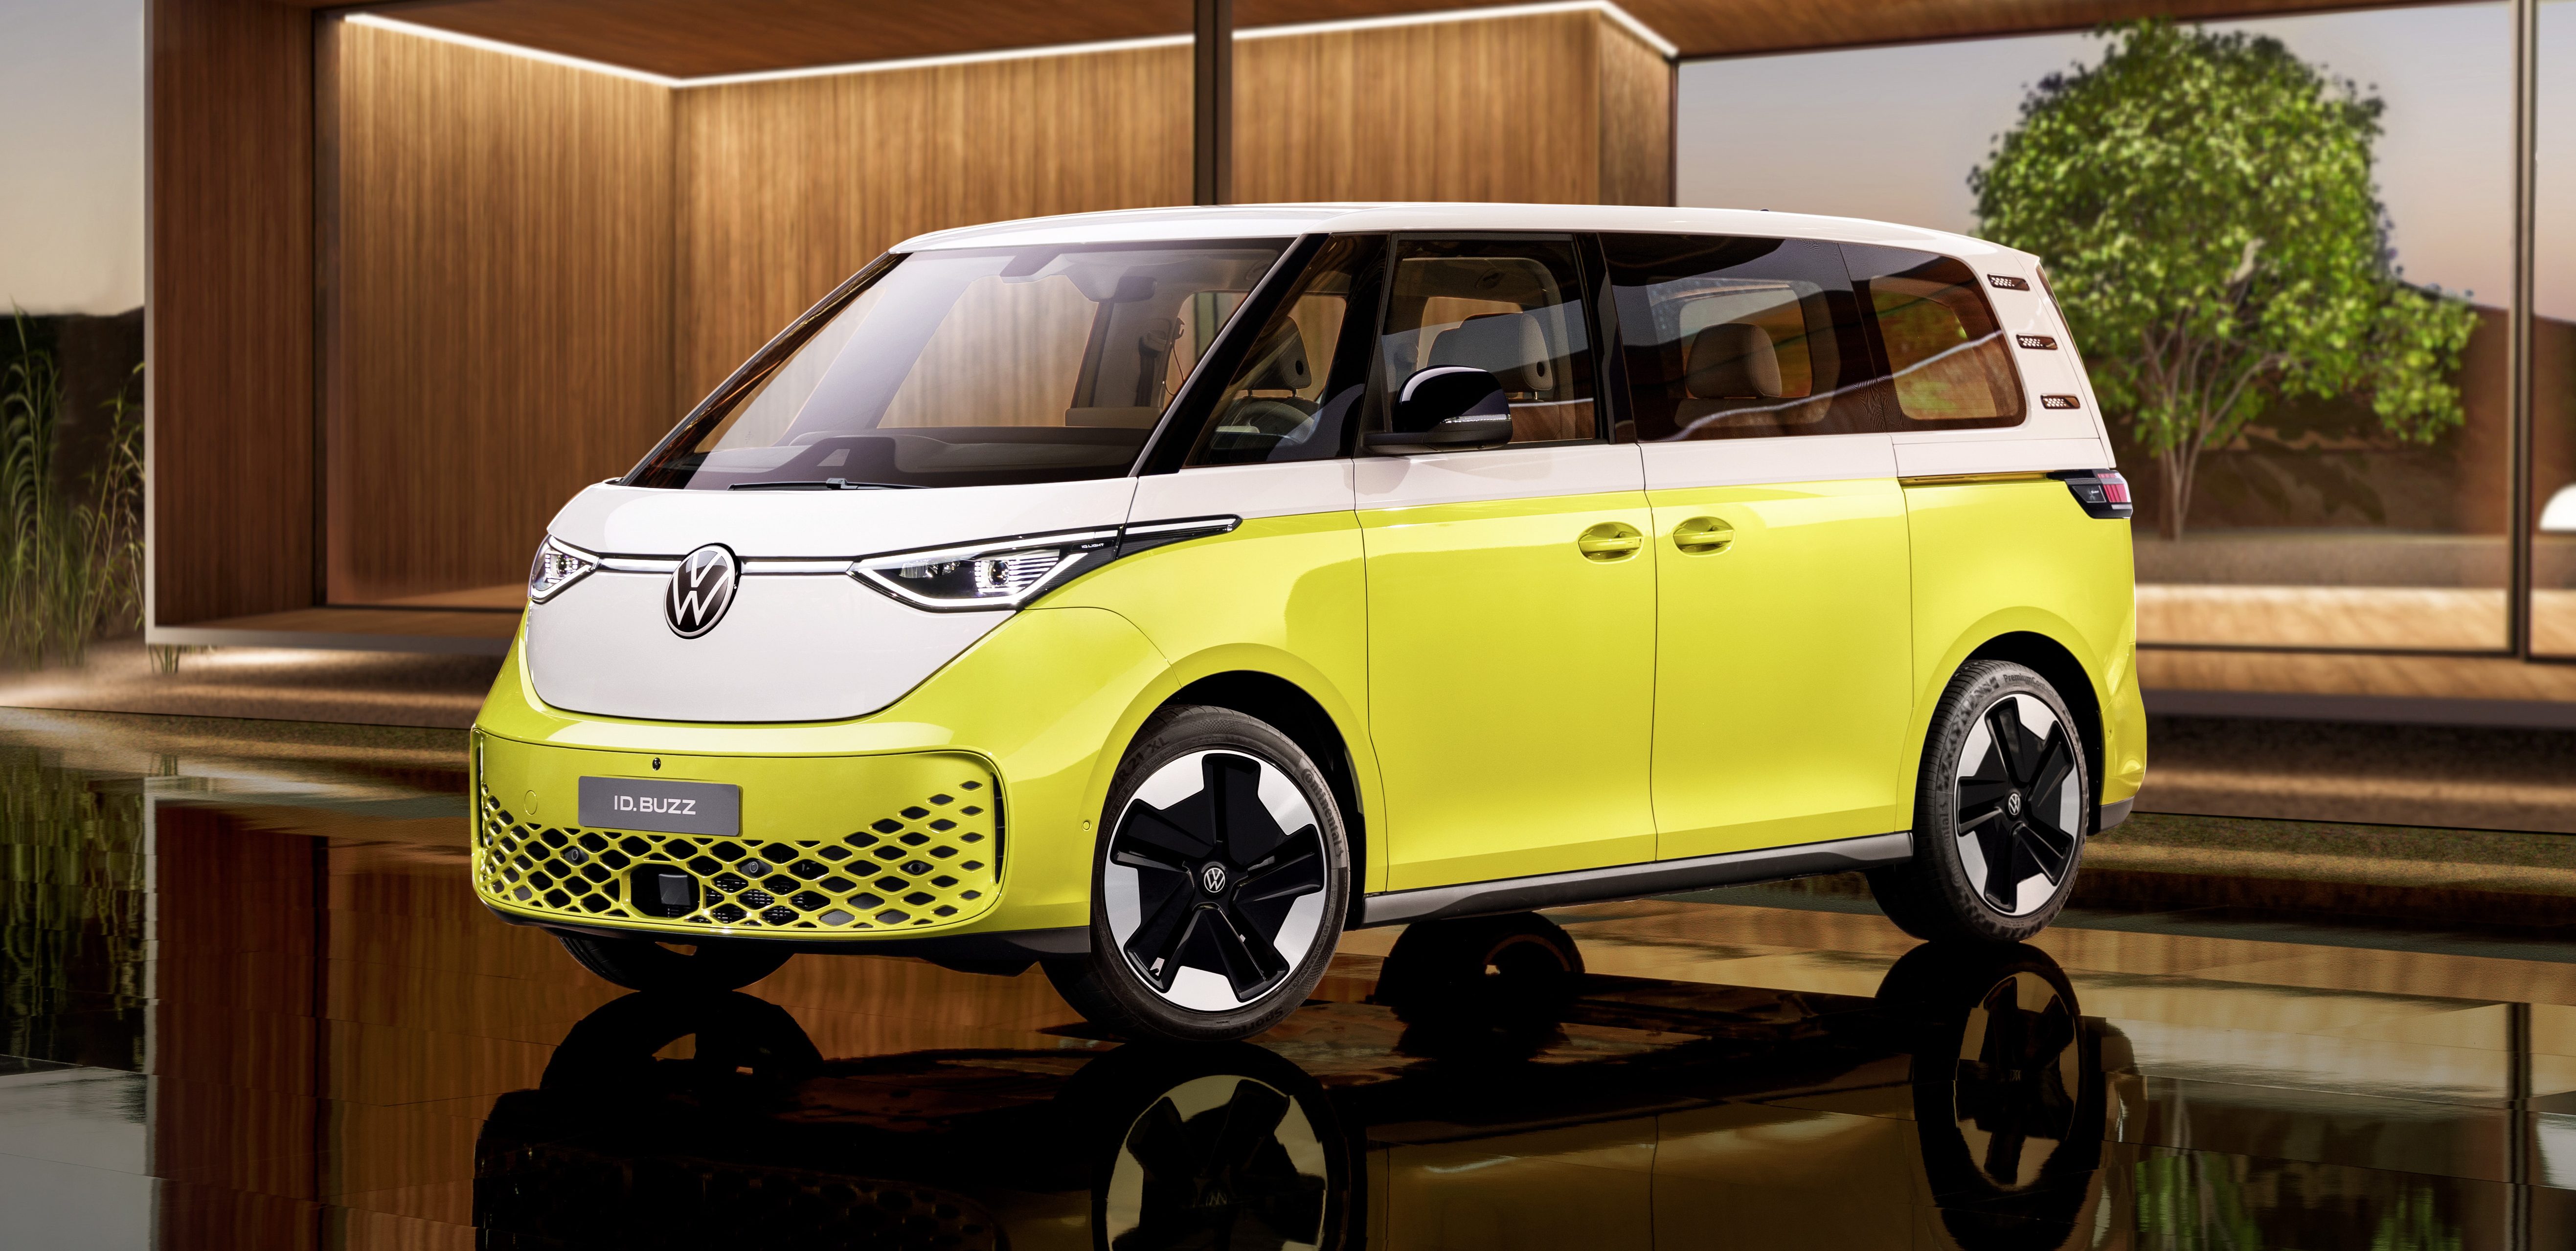 VW launches iconic 'ID.Buzz' EV, but does this incarnation of the